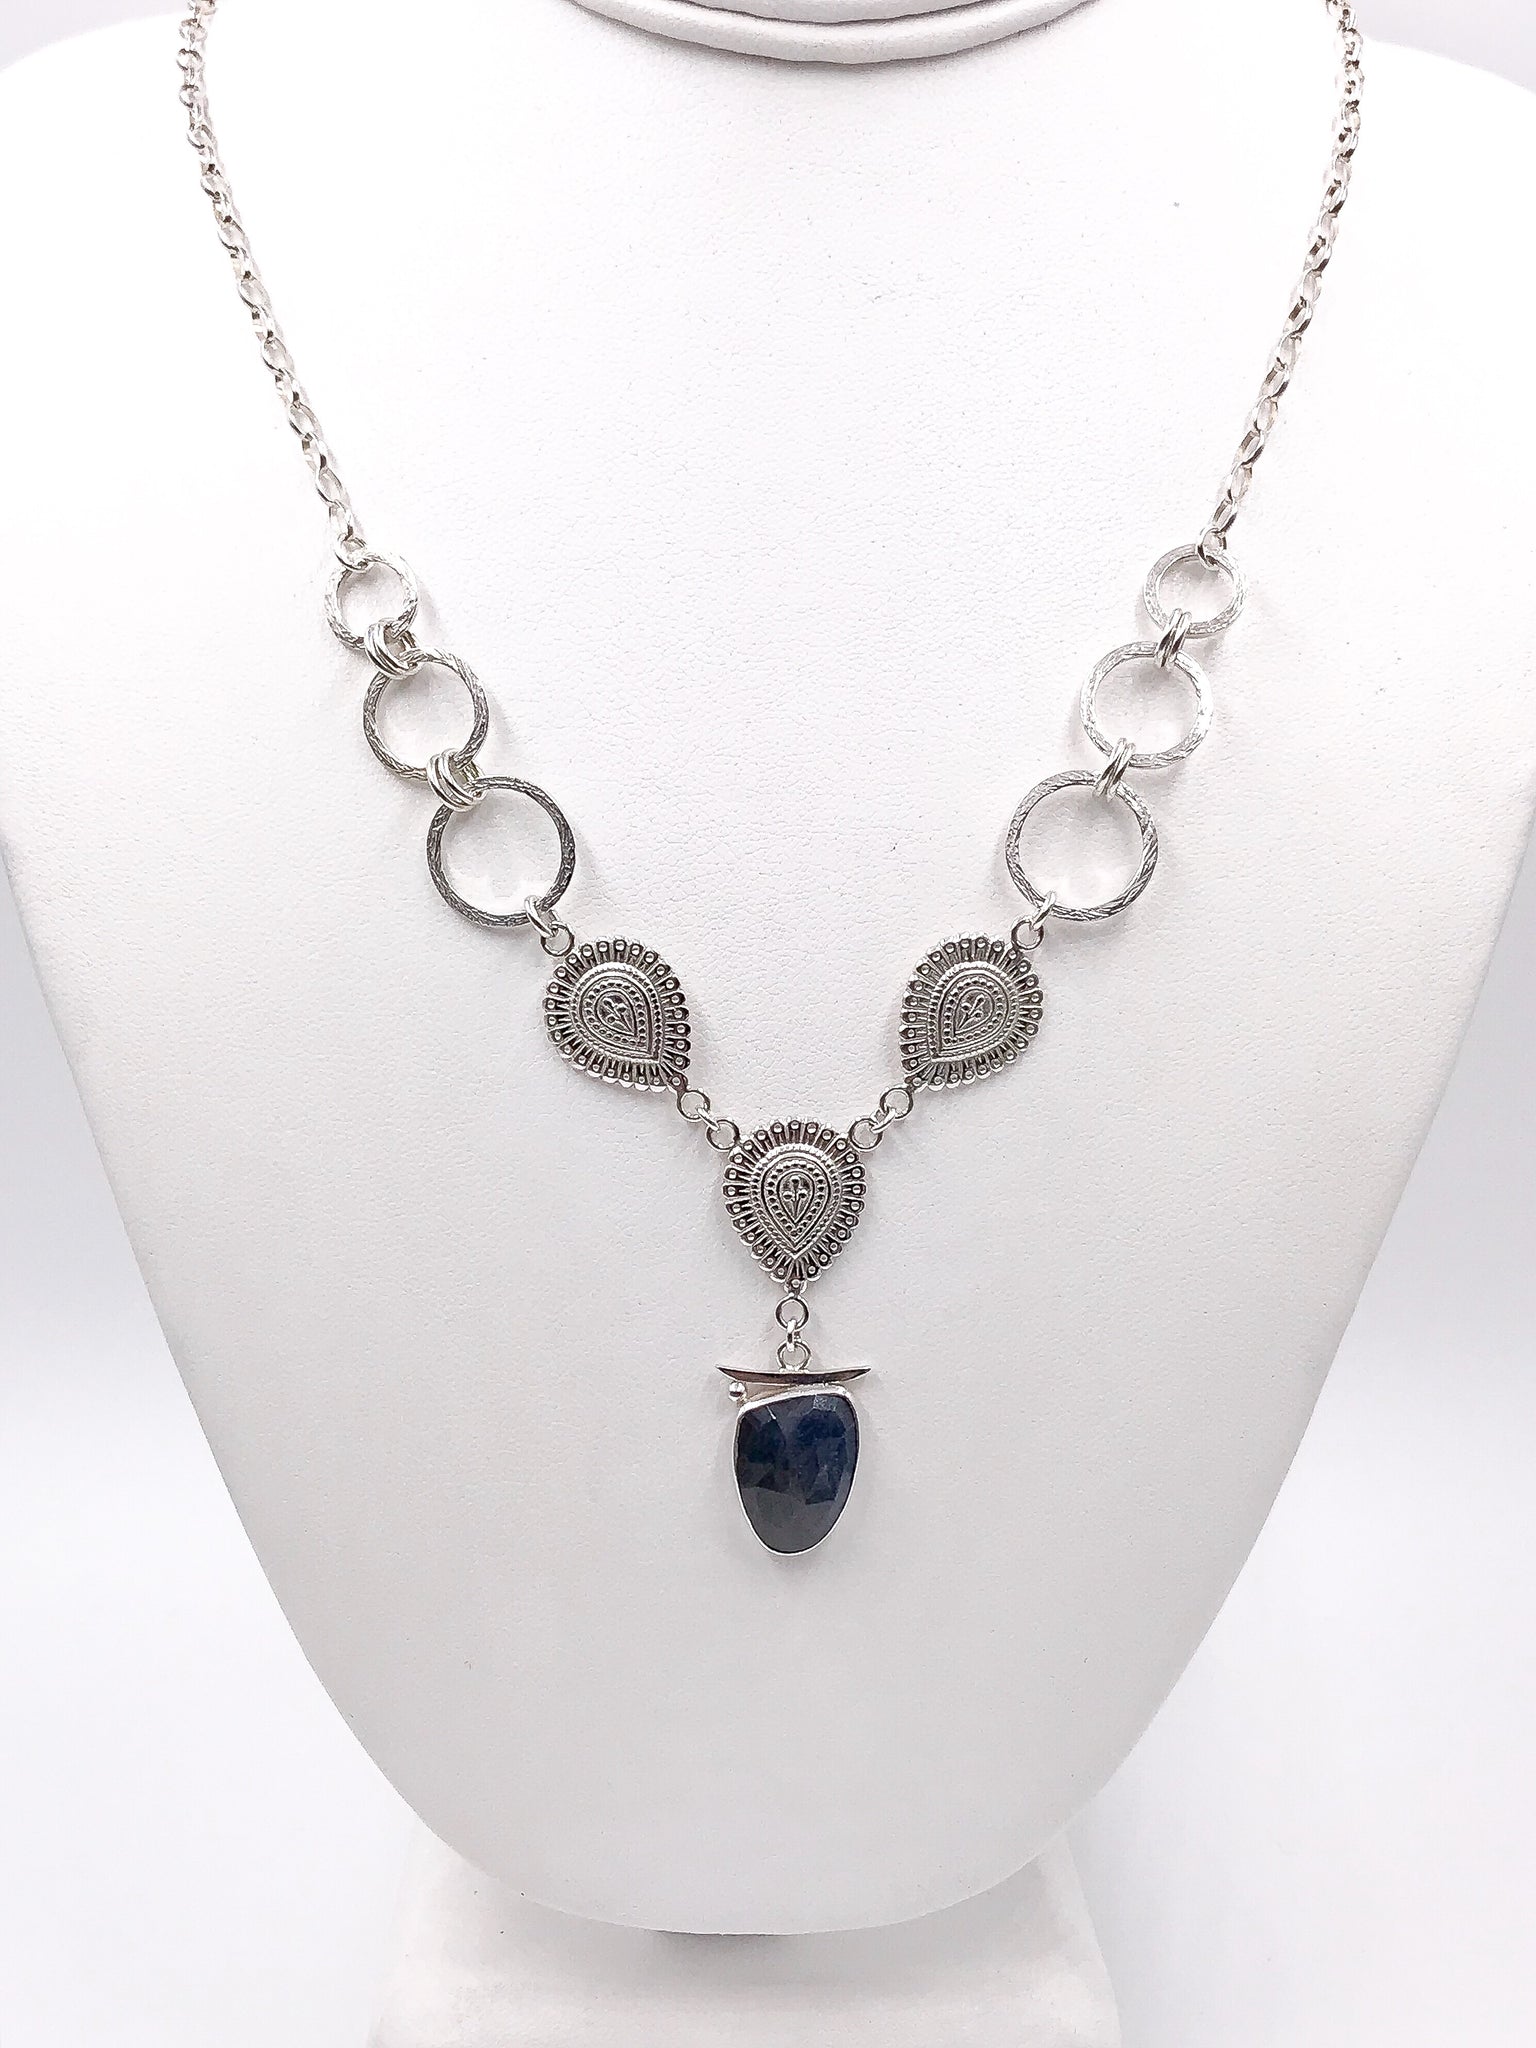 Blue Sapphire and Silver Necklace – Magyuris Jewelry Studio